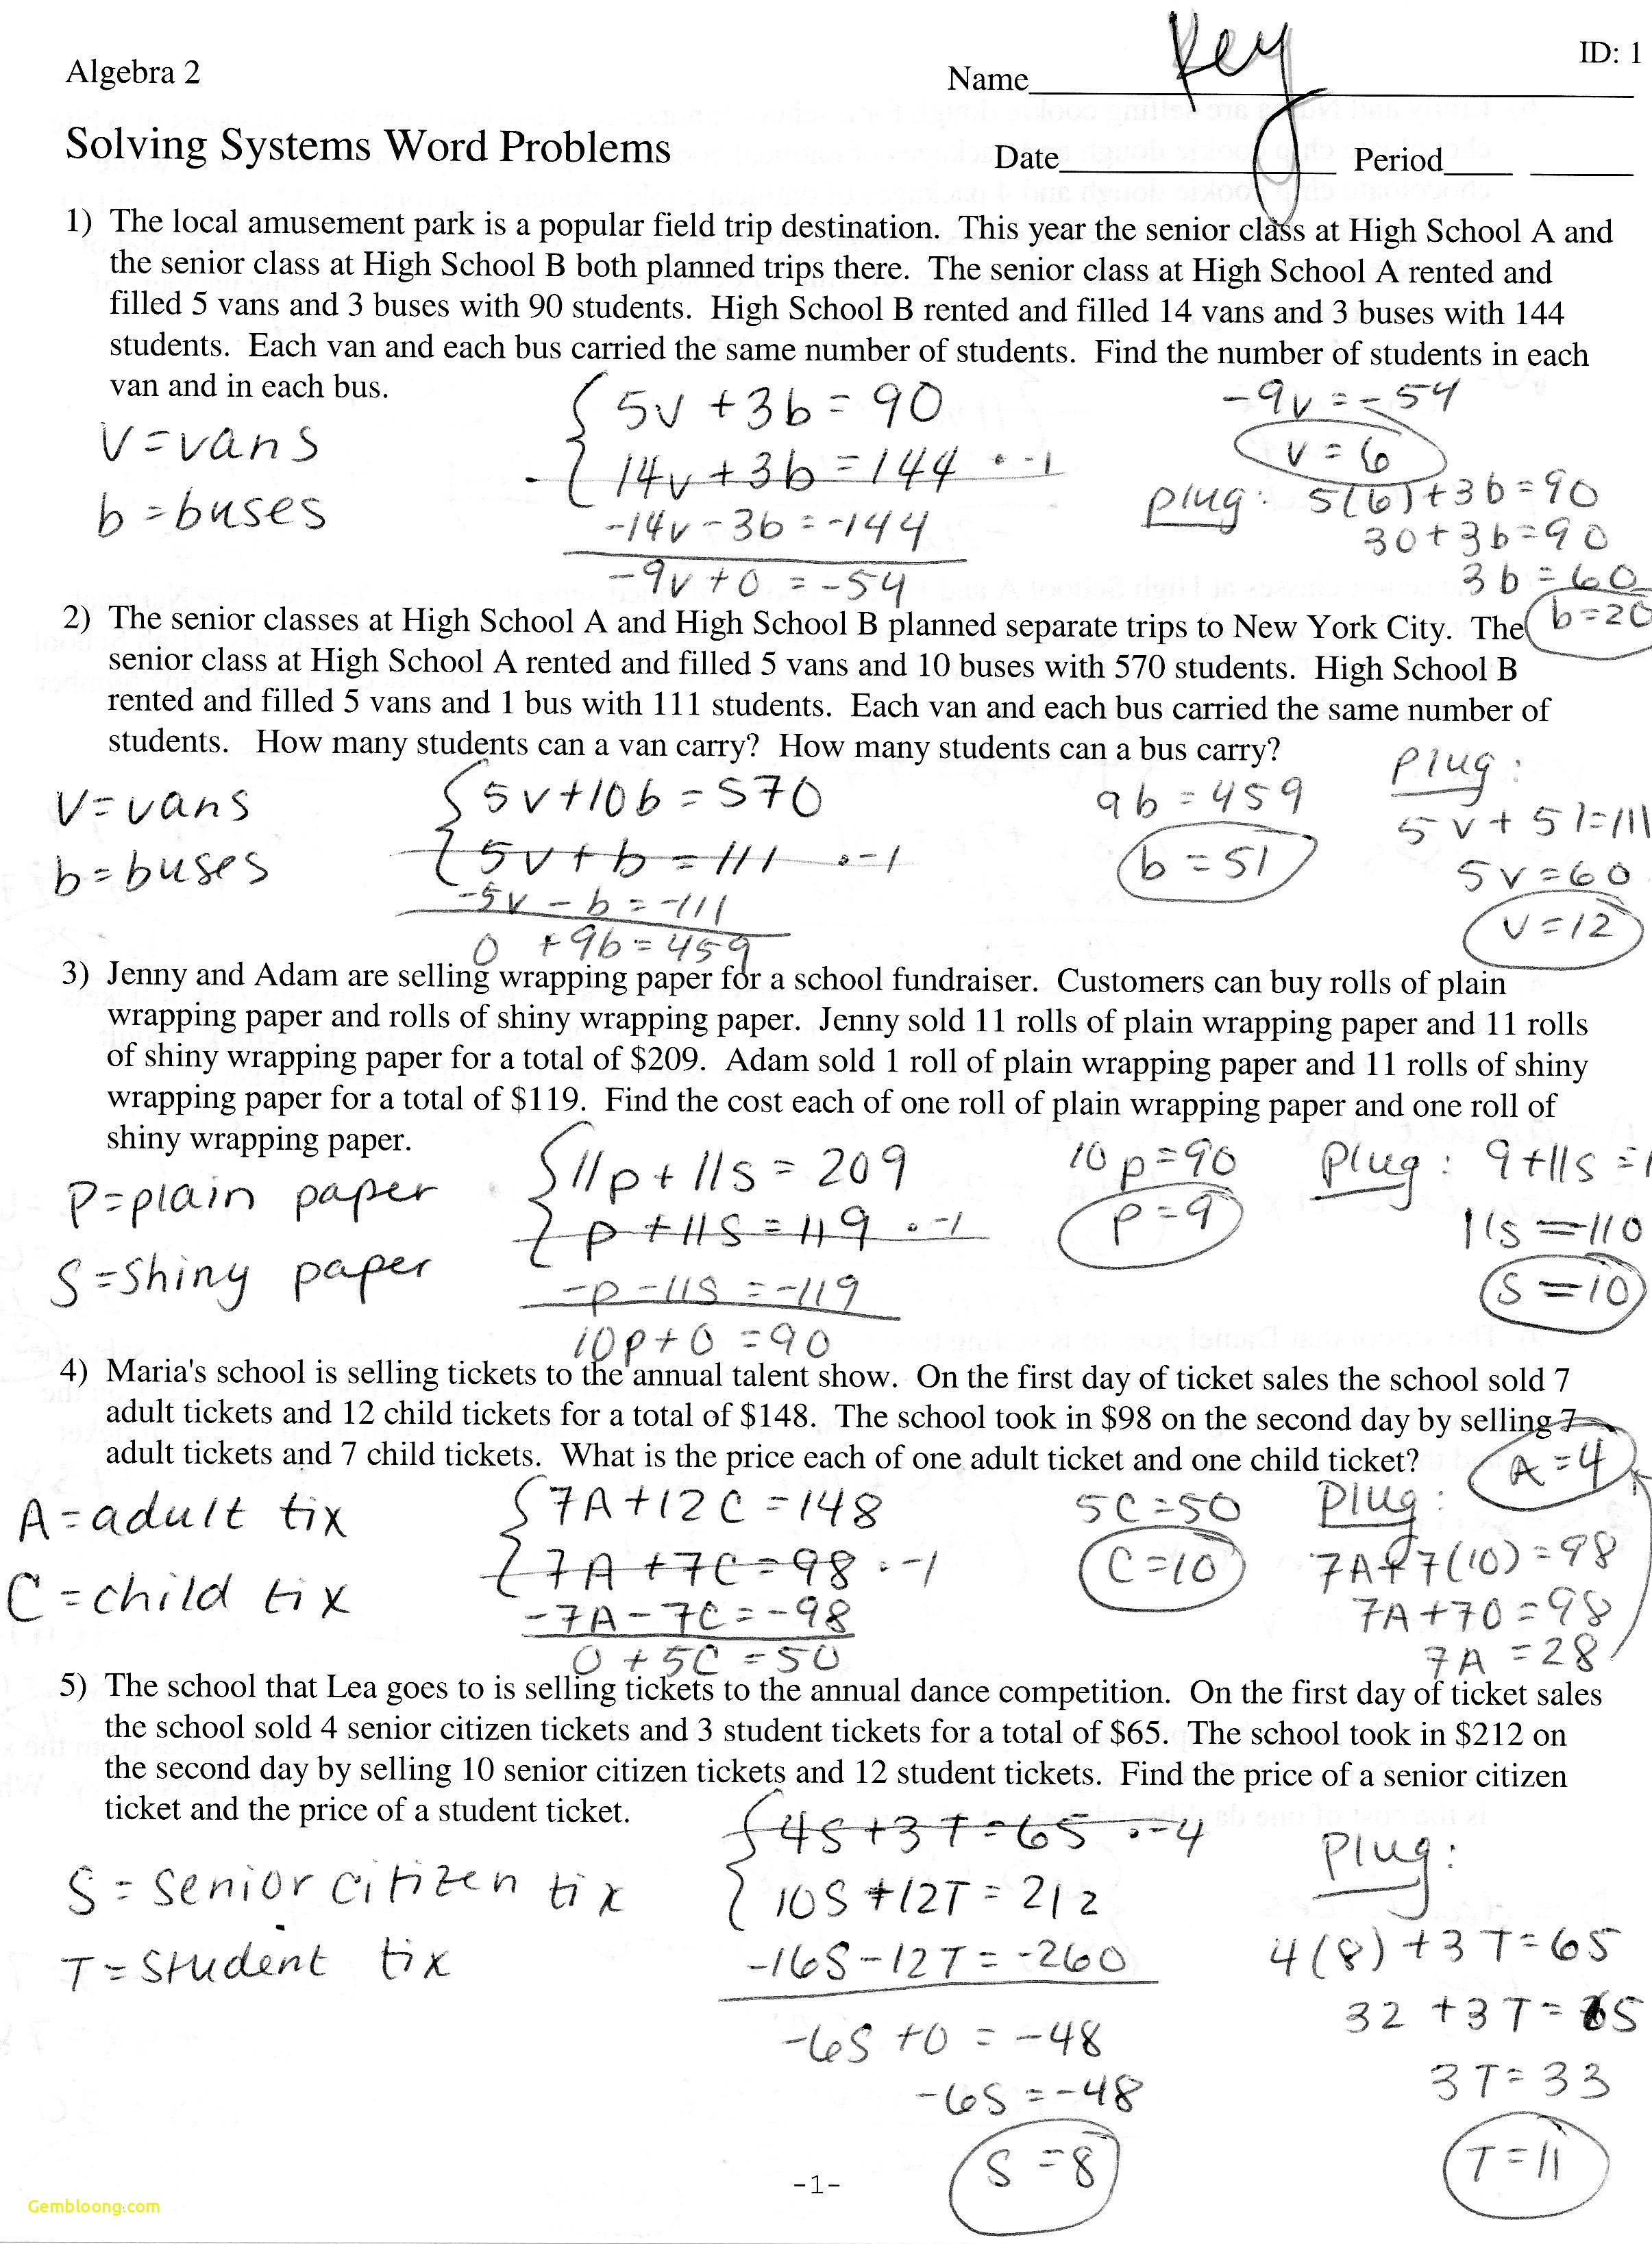 solve-and-graph-the-inequalities-answer-key-16-best-images-of-infinite-algebra-1-worksheets